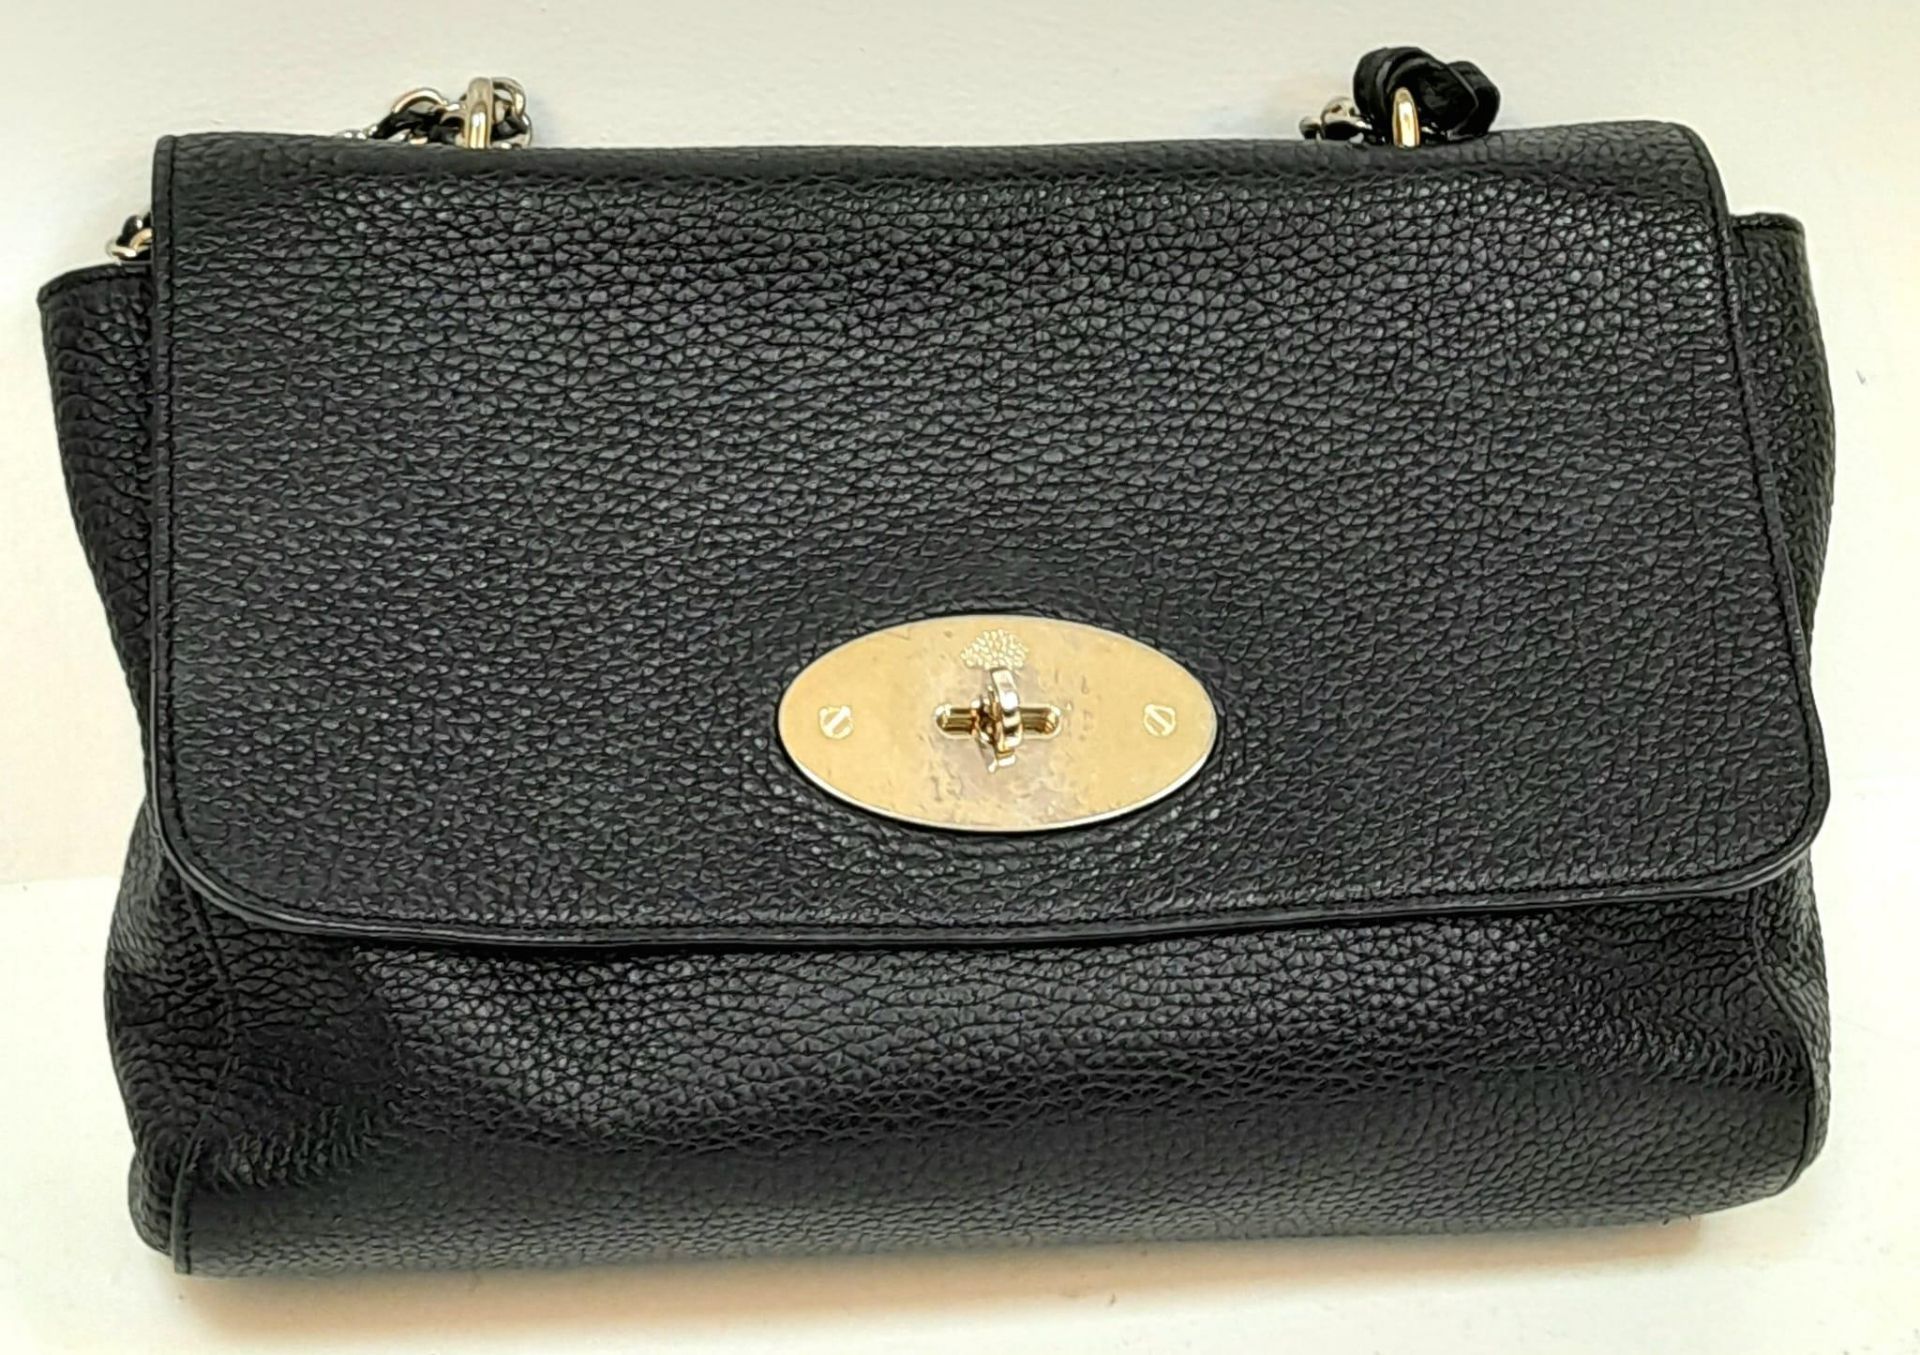 A Mulberry Black 'Lily' Bag. Leather exterior with gold-toned hardware, chain and leather strap, - Image 2 of 12